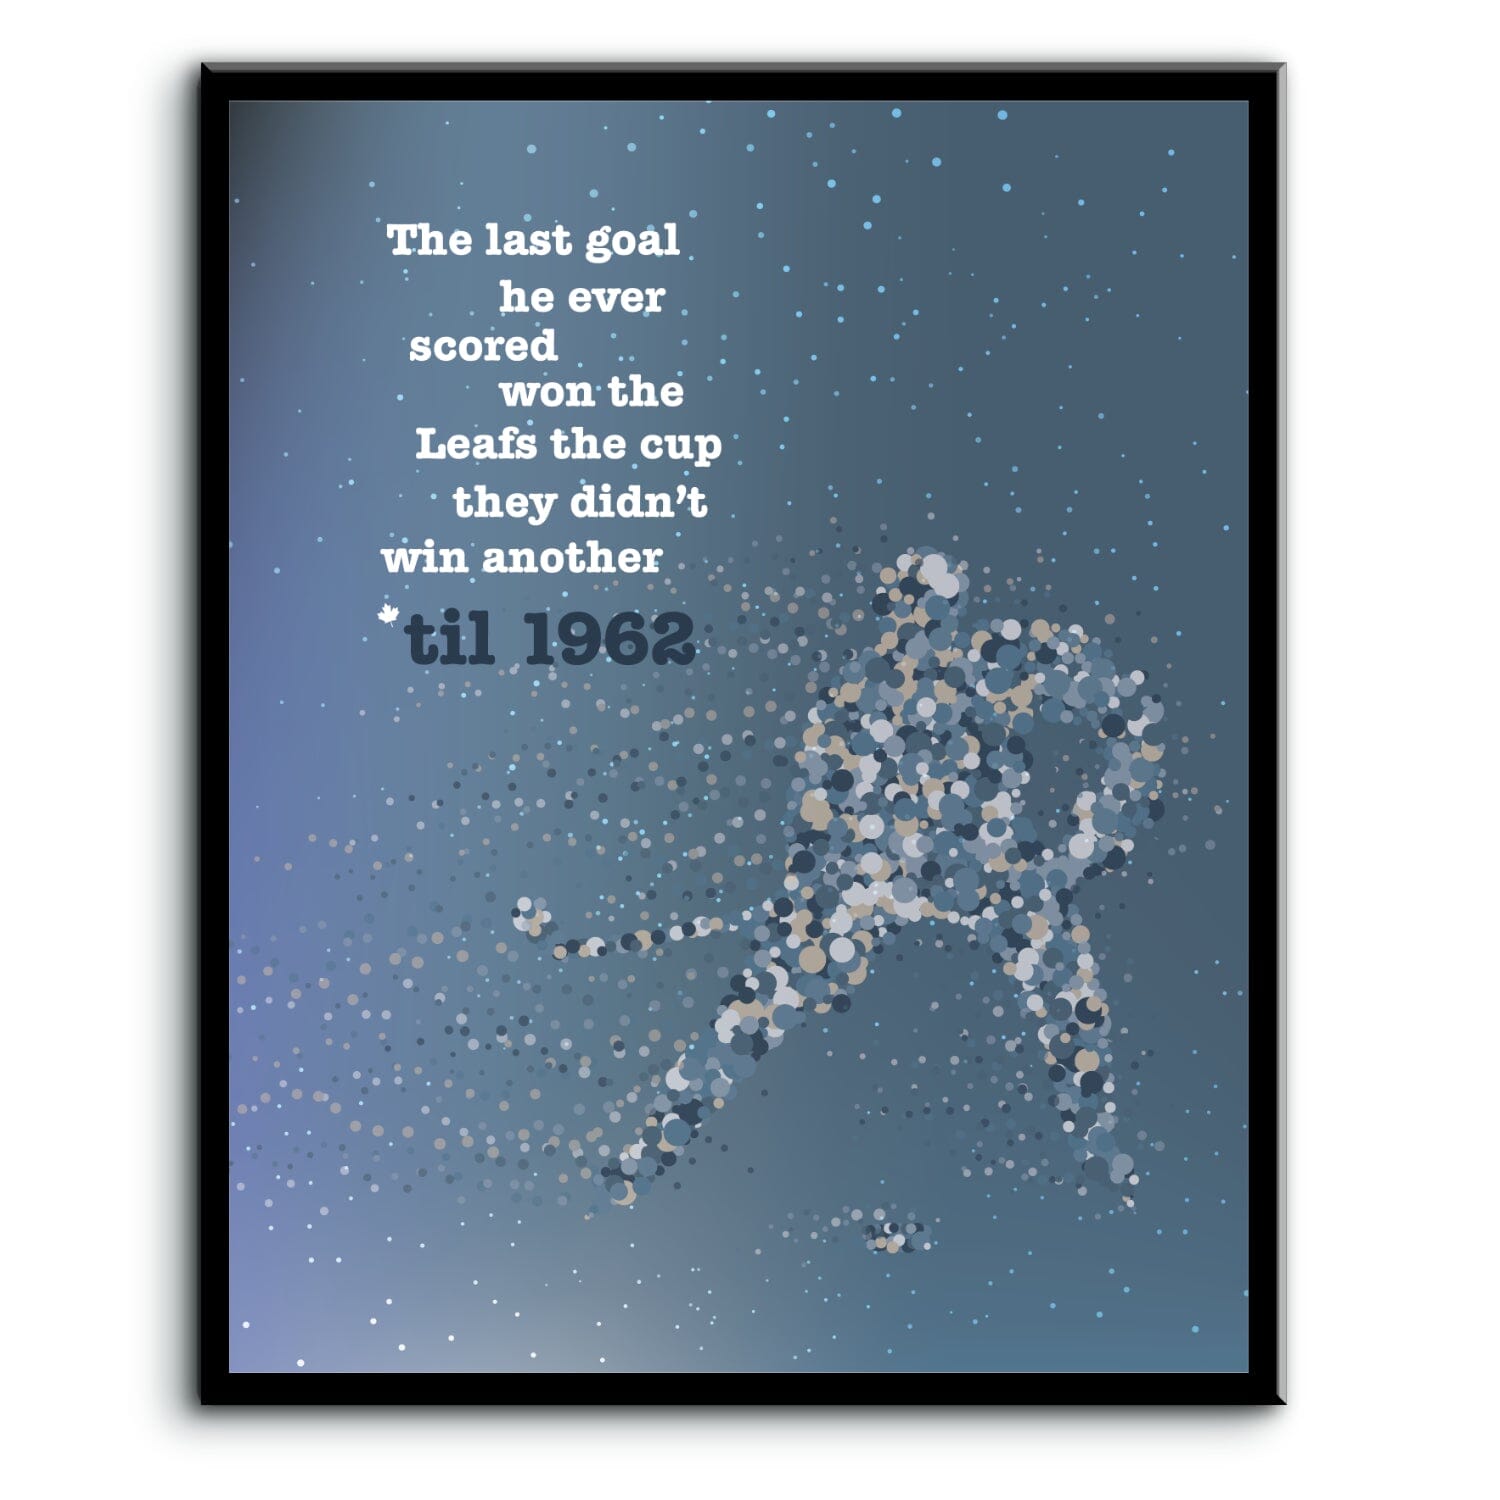 50 Mission Cap by the Tragically Hip - Song Lyric Art Print Song Lyrics Art Song Lyrics Art 8x10 Plaque Mount 